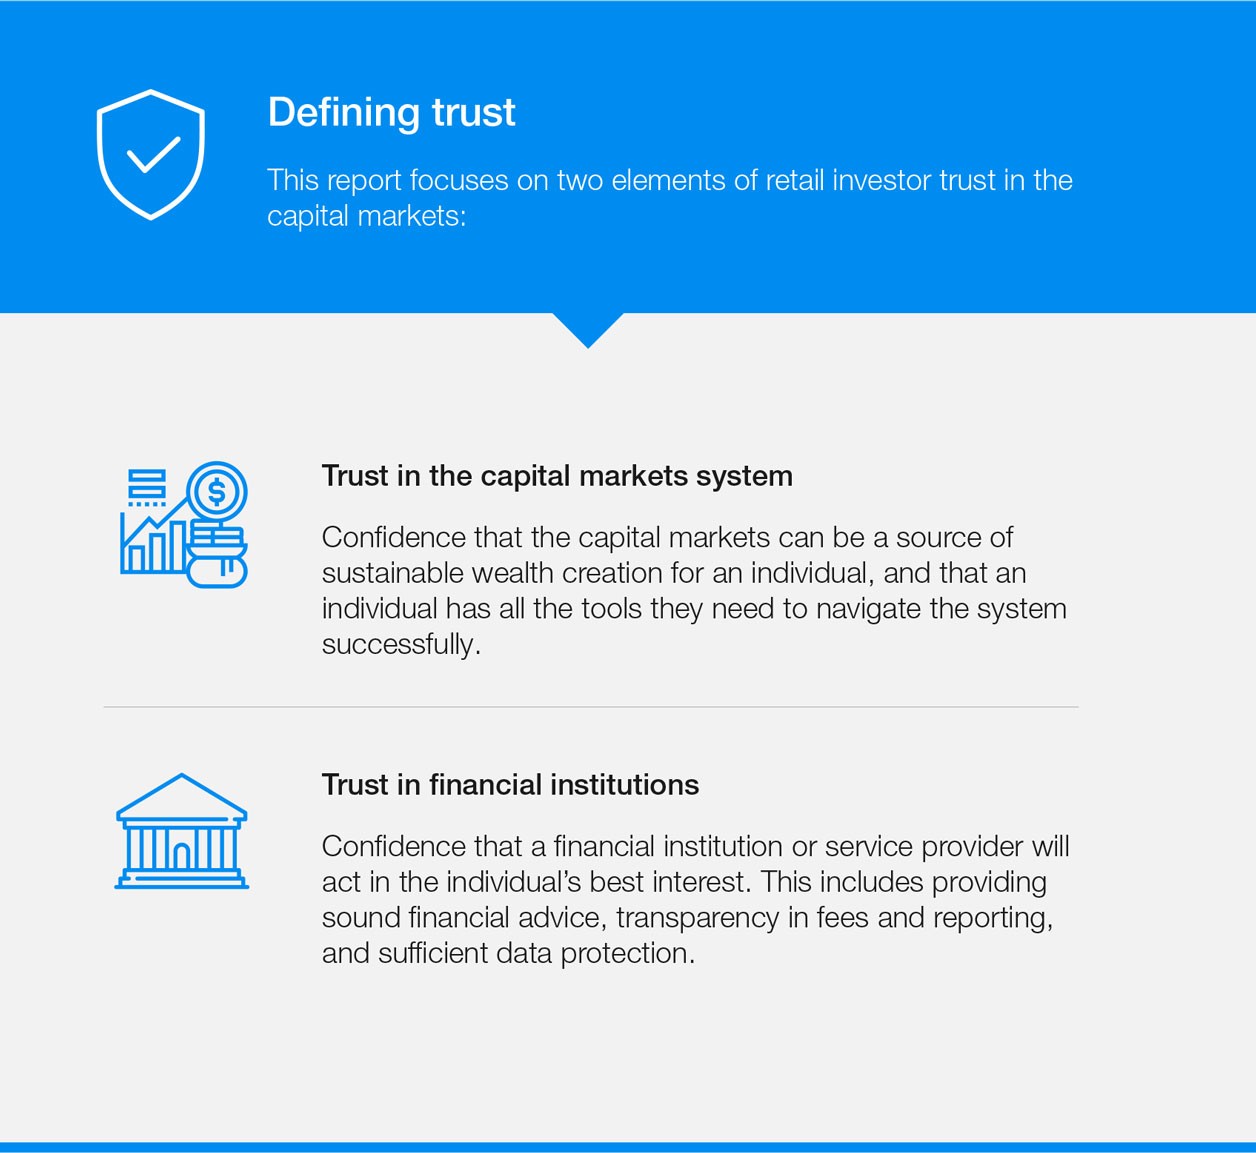 Figure 2. Defining Trust - in the capital markets system and financial institutions